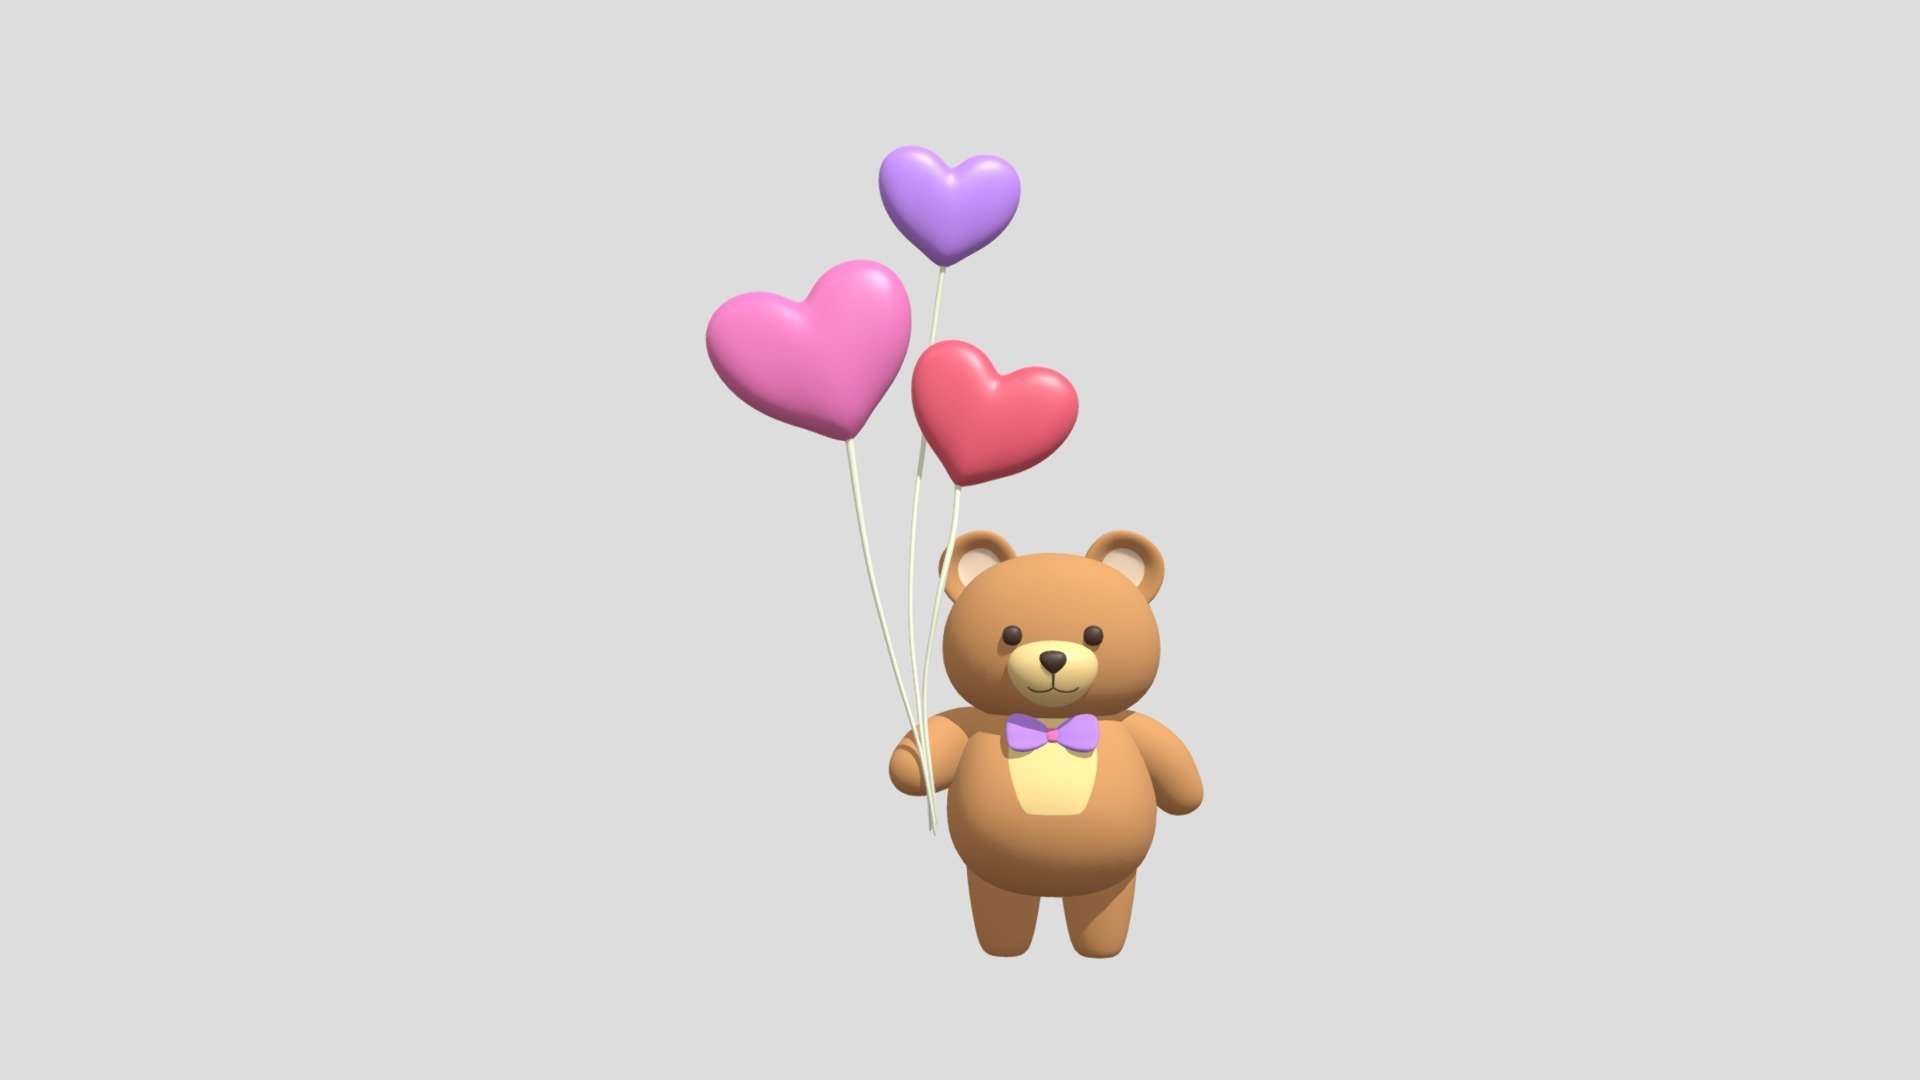 Love. Valentine's day cute teddy bear with heartshaped balloons.


SketchfabWeeklyChallenge2023 - Cute bear with balloons - 3D model by SandijaD 3d model